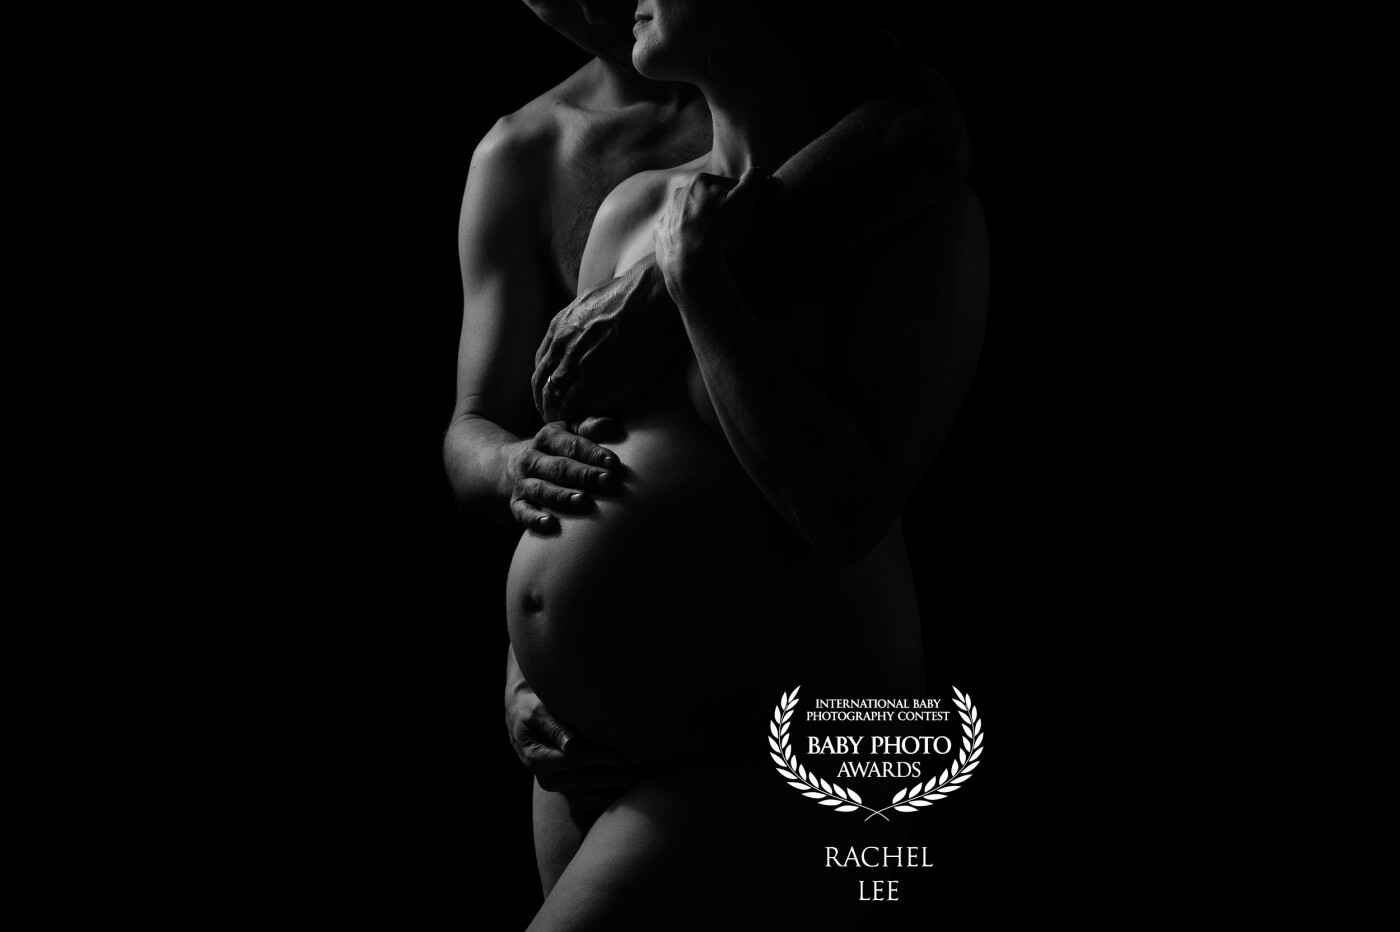 I love this portrait because it is both tender and strong at the same time. It captures the intimacy and expectation of the pregnancy journey.